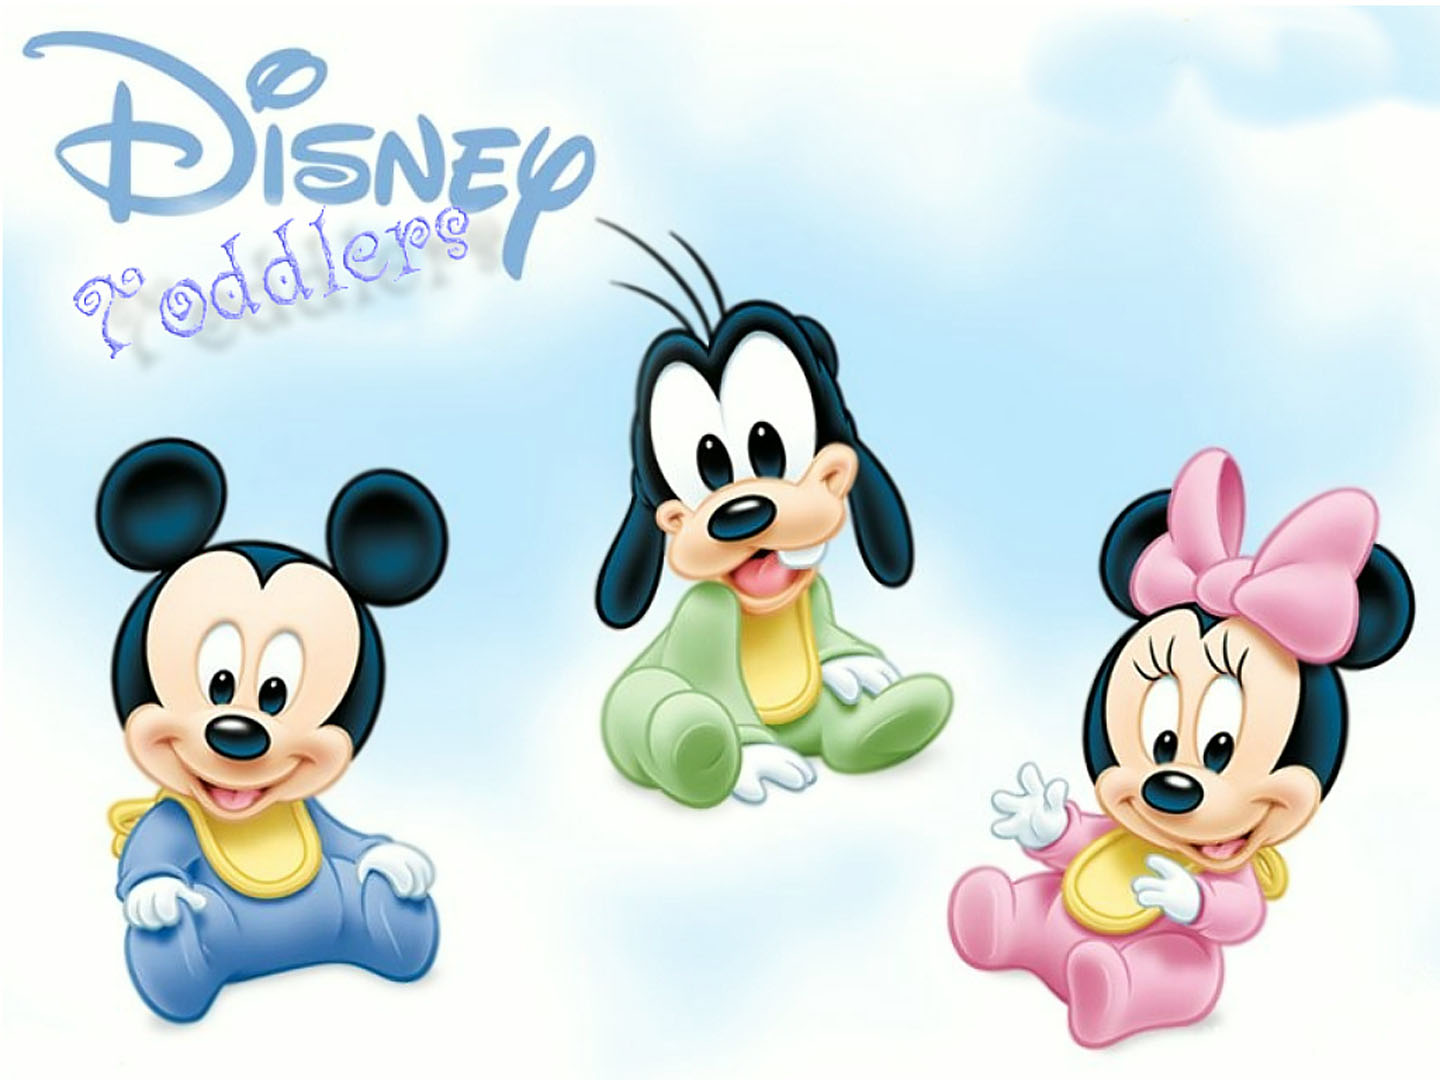 Baby Mickey Goofy And Minnie - Cute Baby Mickey Mouse And Friends - HD Wallpaper 